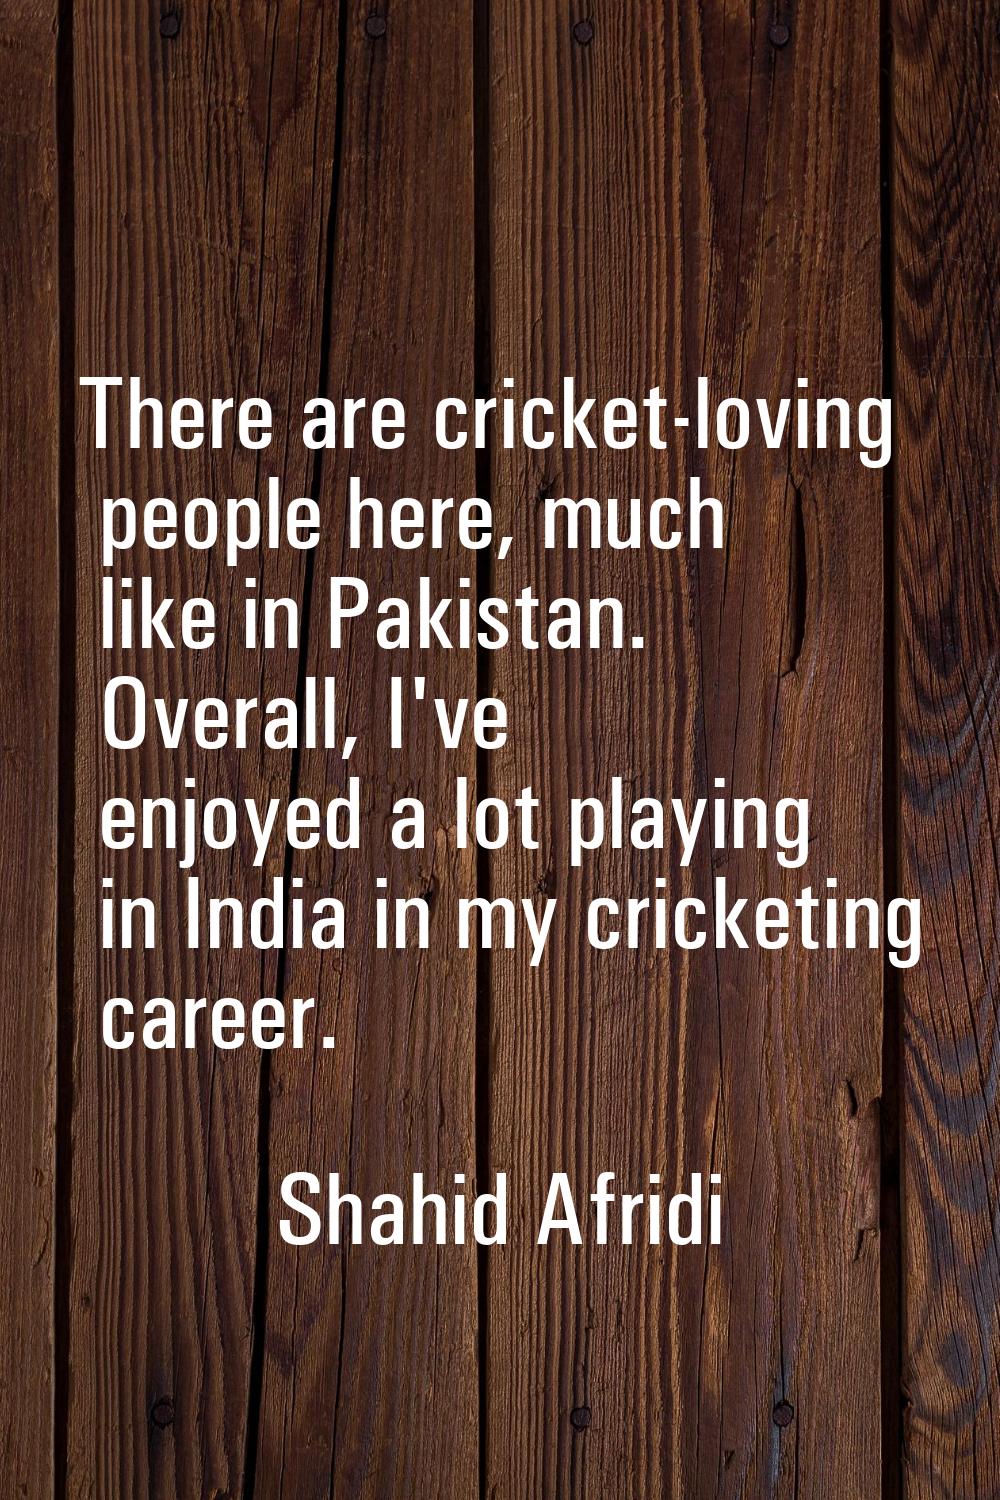 There are cricket-loving people here, much like in Pakistan. Overall, I've enjoyed a lot playing in